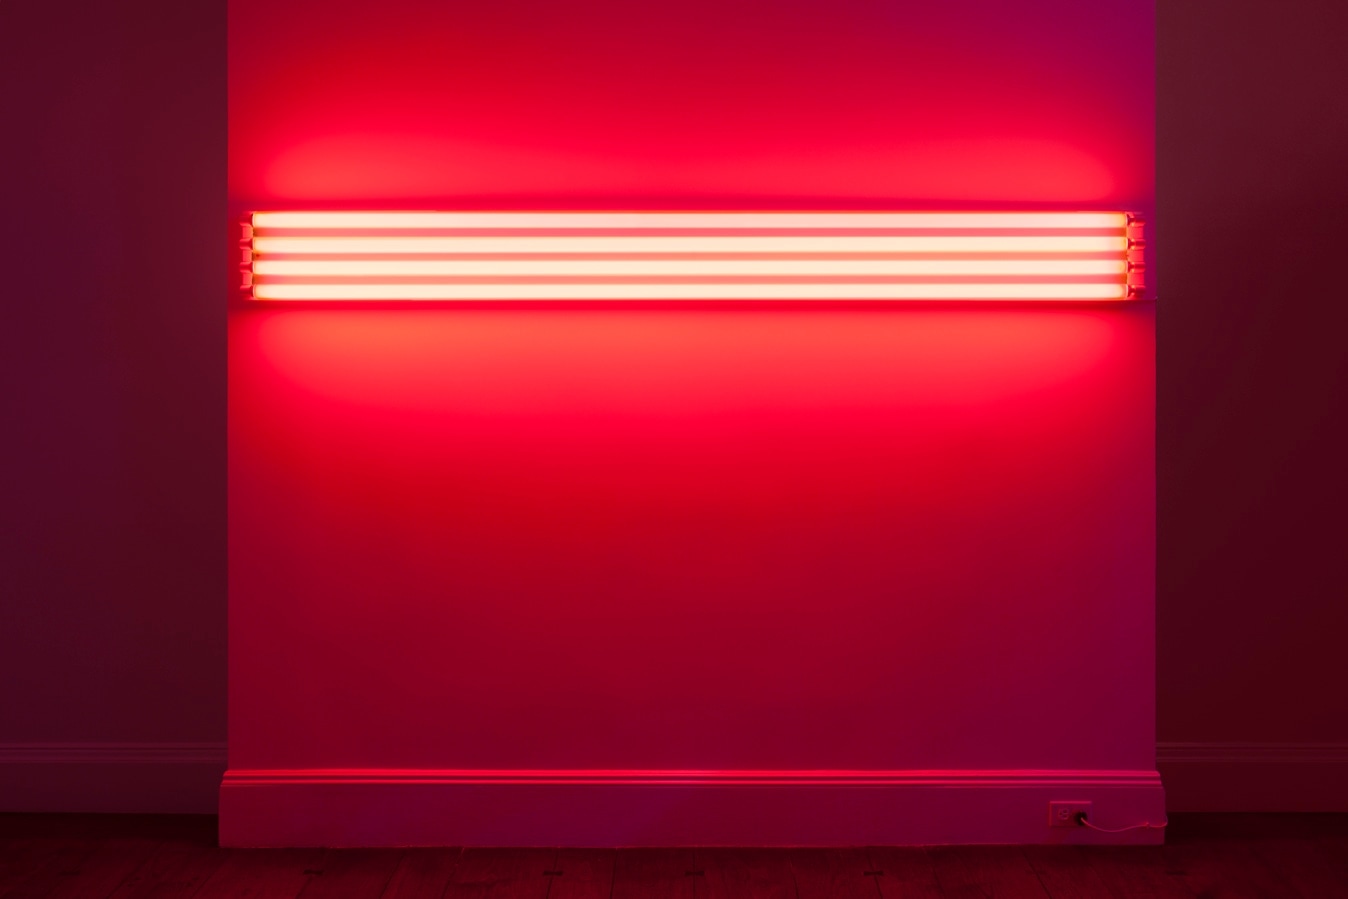 Dan Flavin
four red horizontals (to Sonja)
1963
red fluorescent light
8 3/4 x 96 inches (22.2 x 243.8 cm)